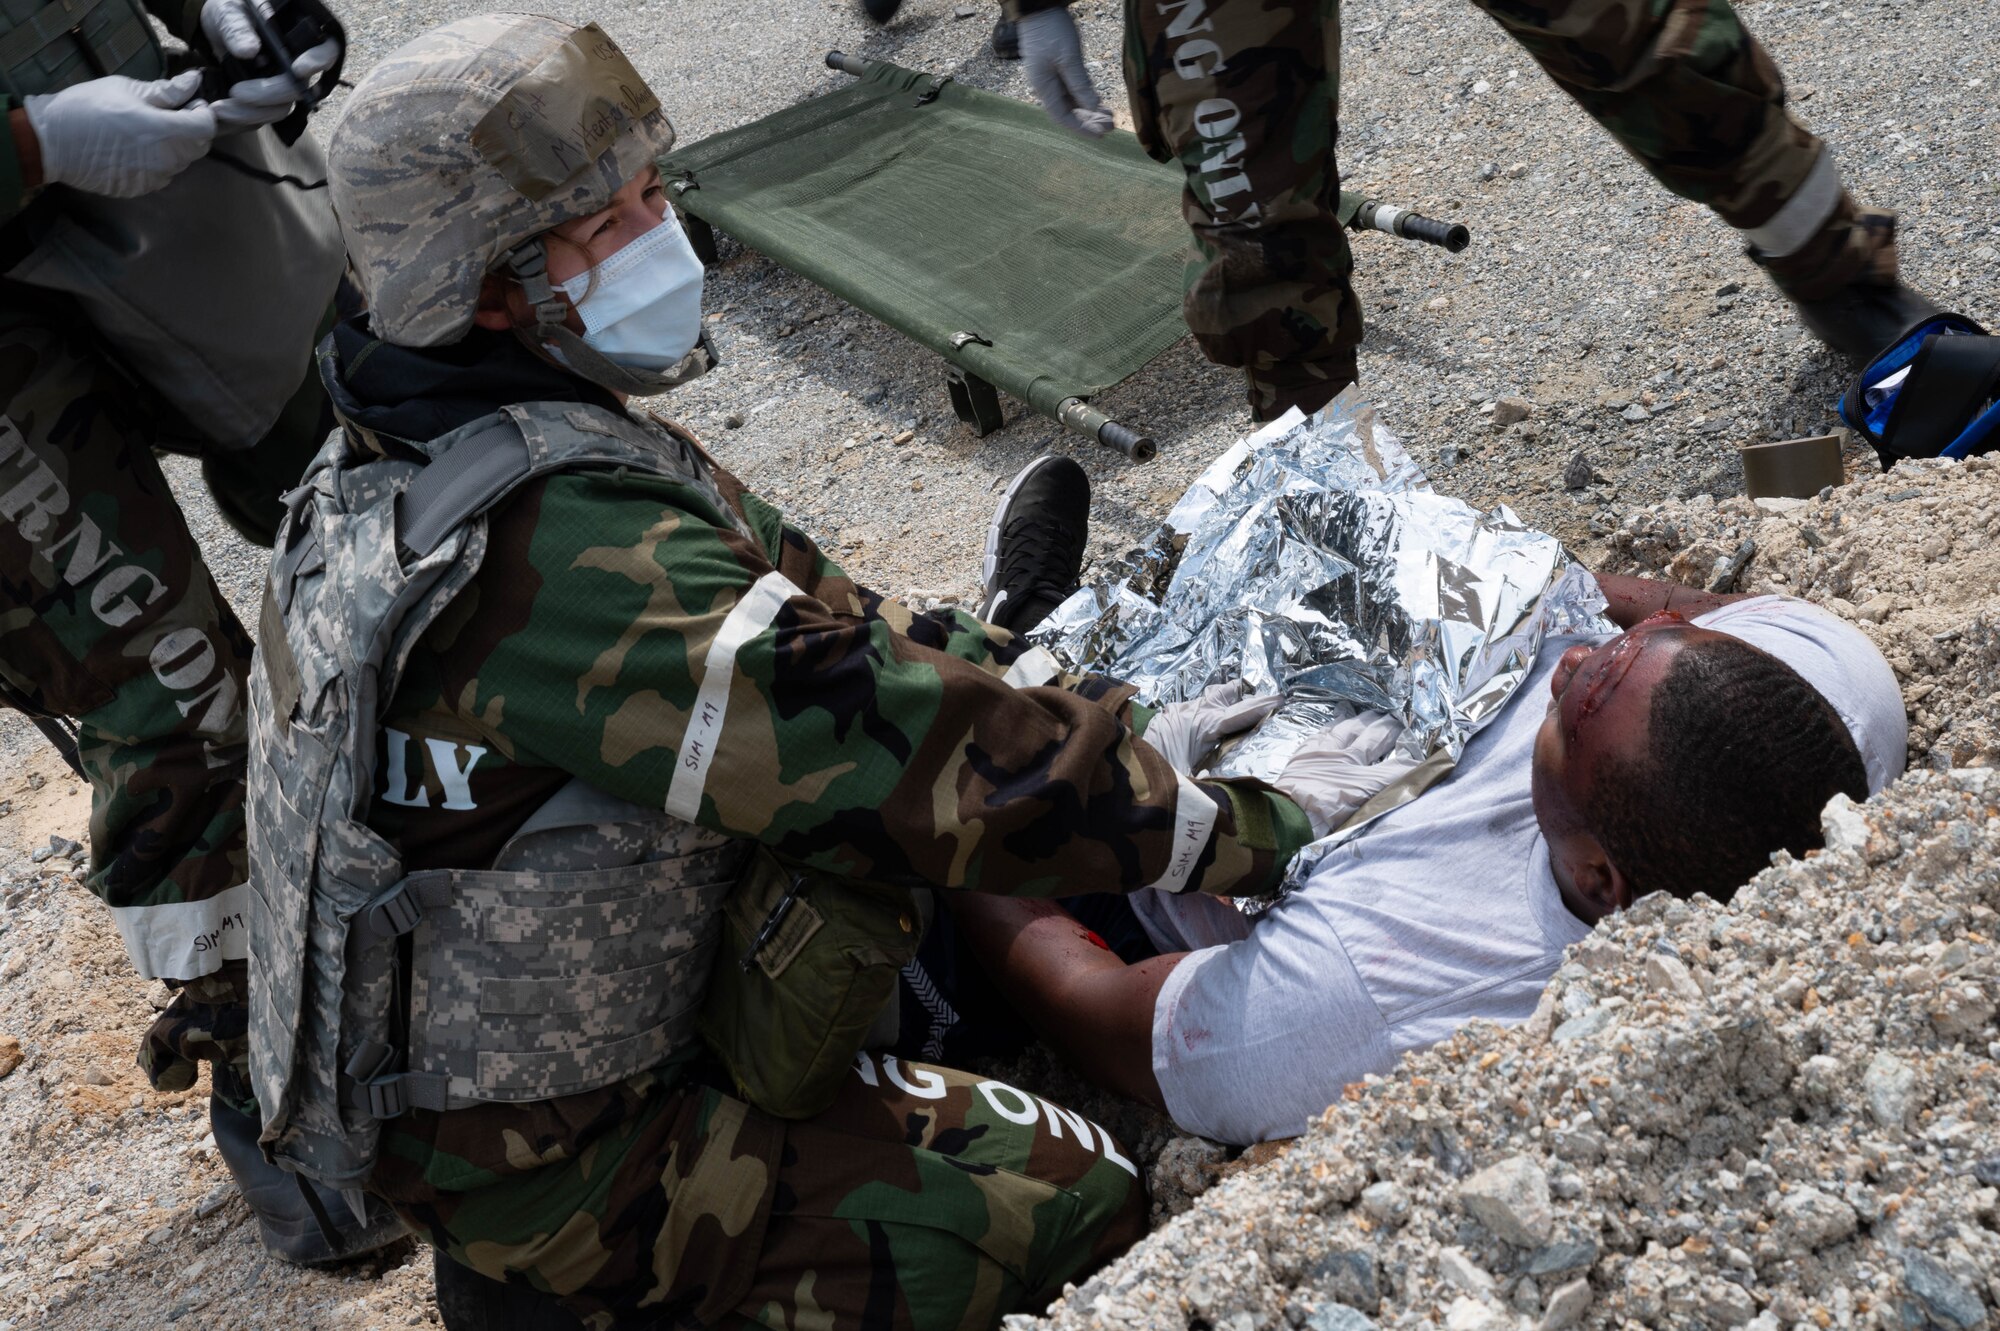 Capt. Danielle Miltenberg from the 51st Medical Group places a warming blanket on a patient during a mass casualty training event